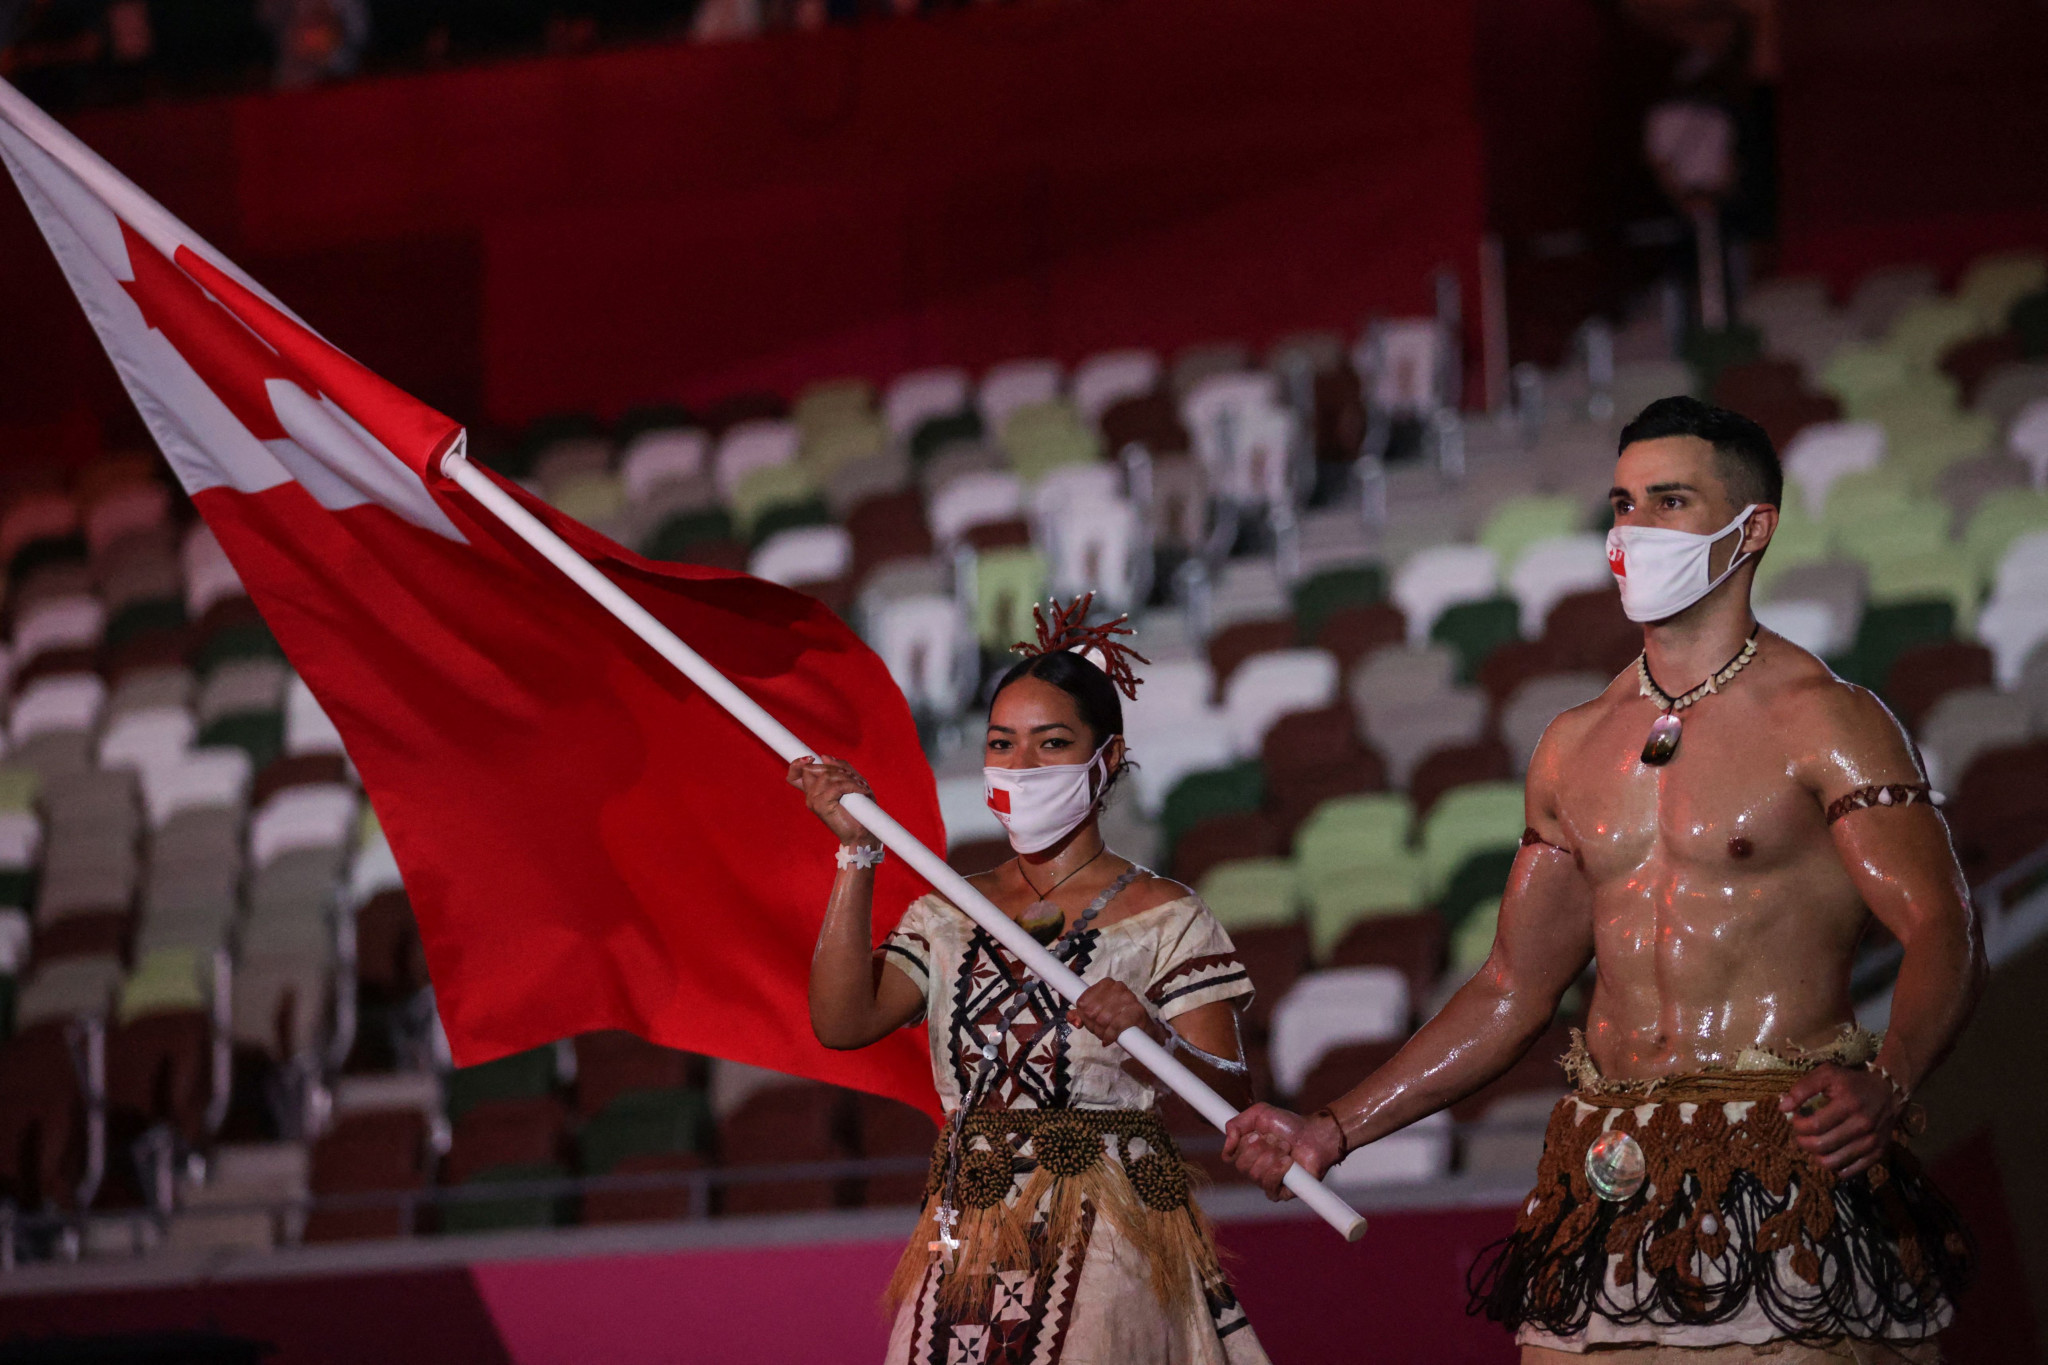 Tongan taekwondo fighter Pita Taufatofua caused a stir when he carried the flag at the Opening Ceremony ©Getty Images